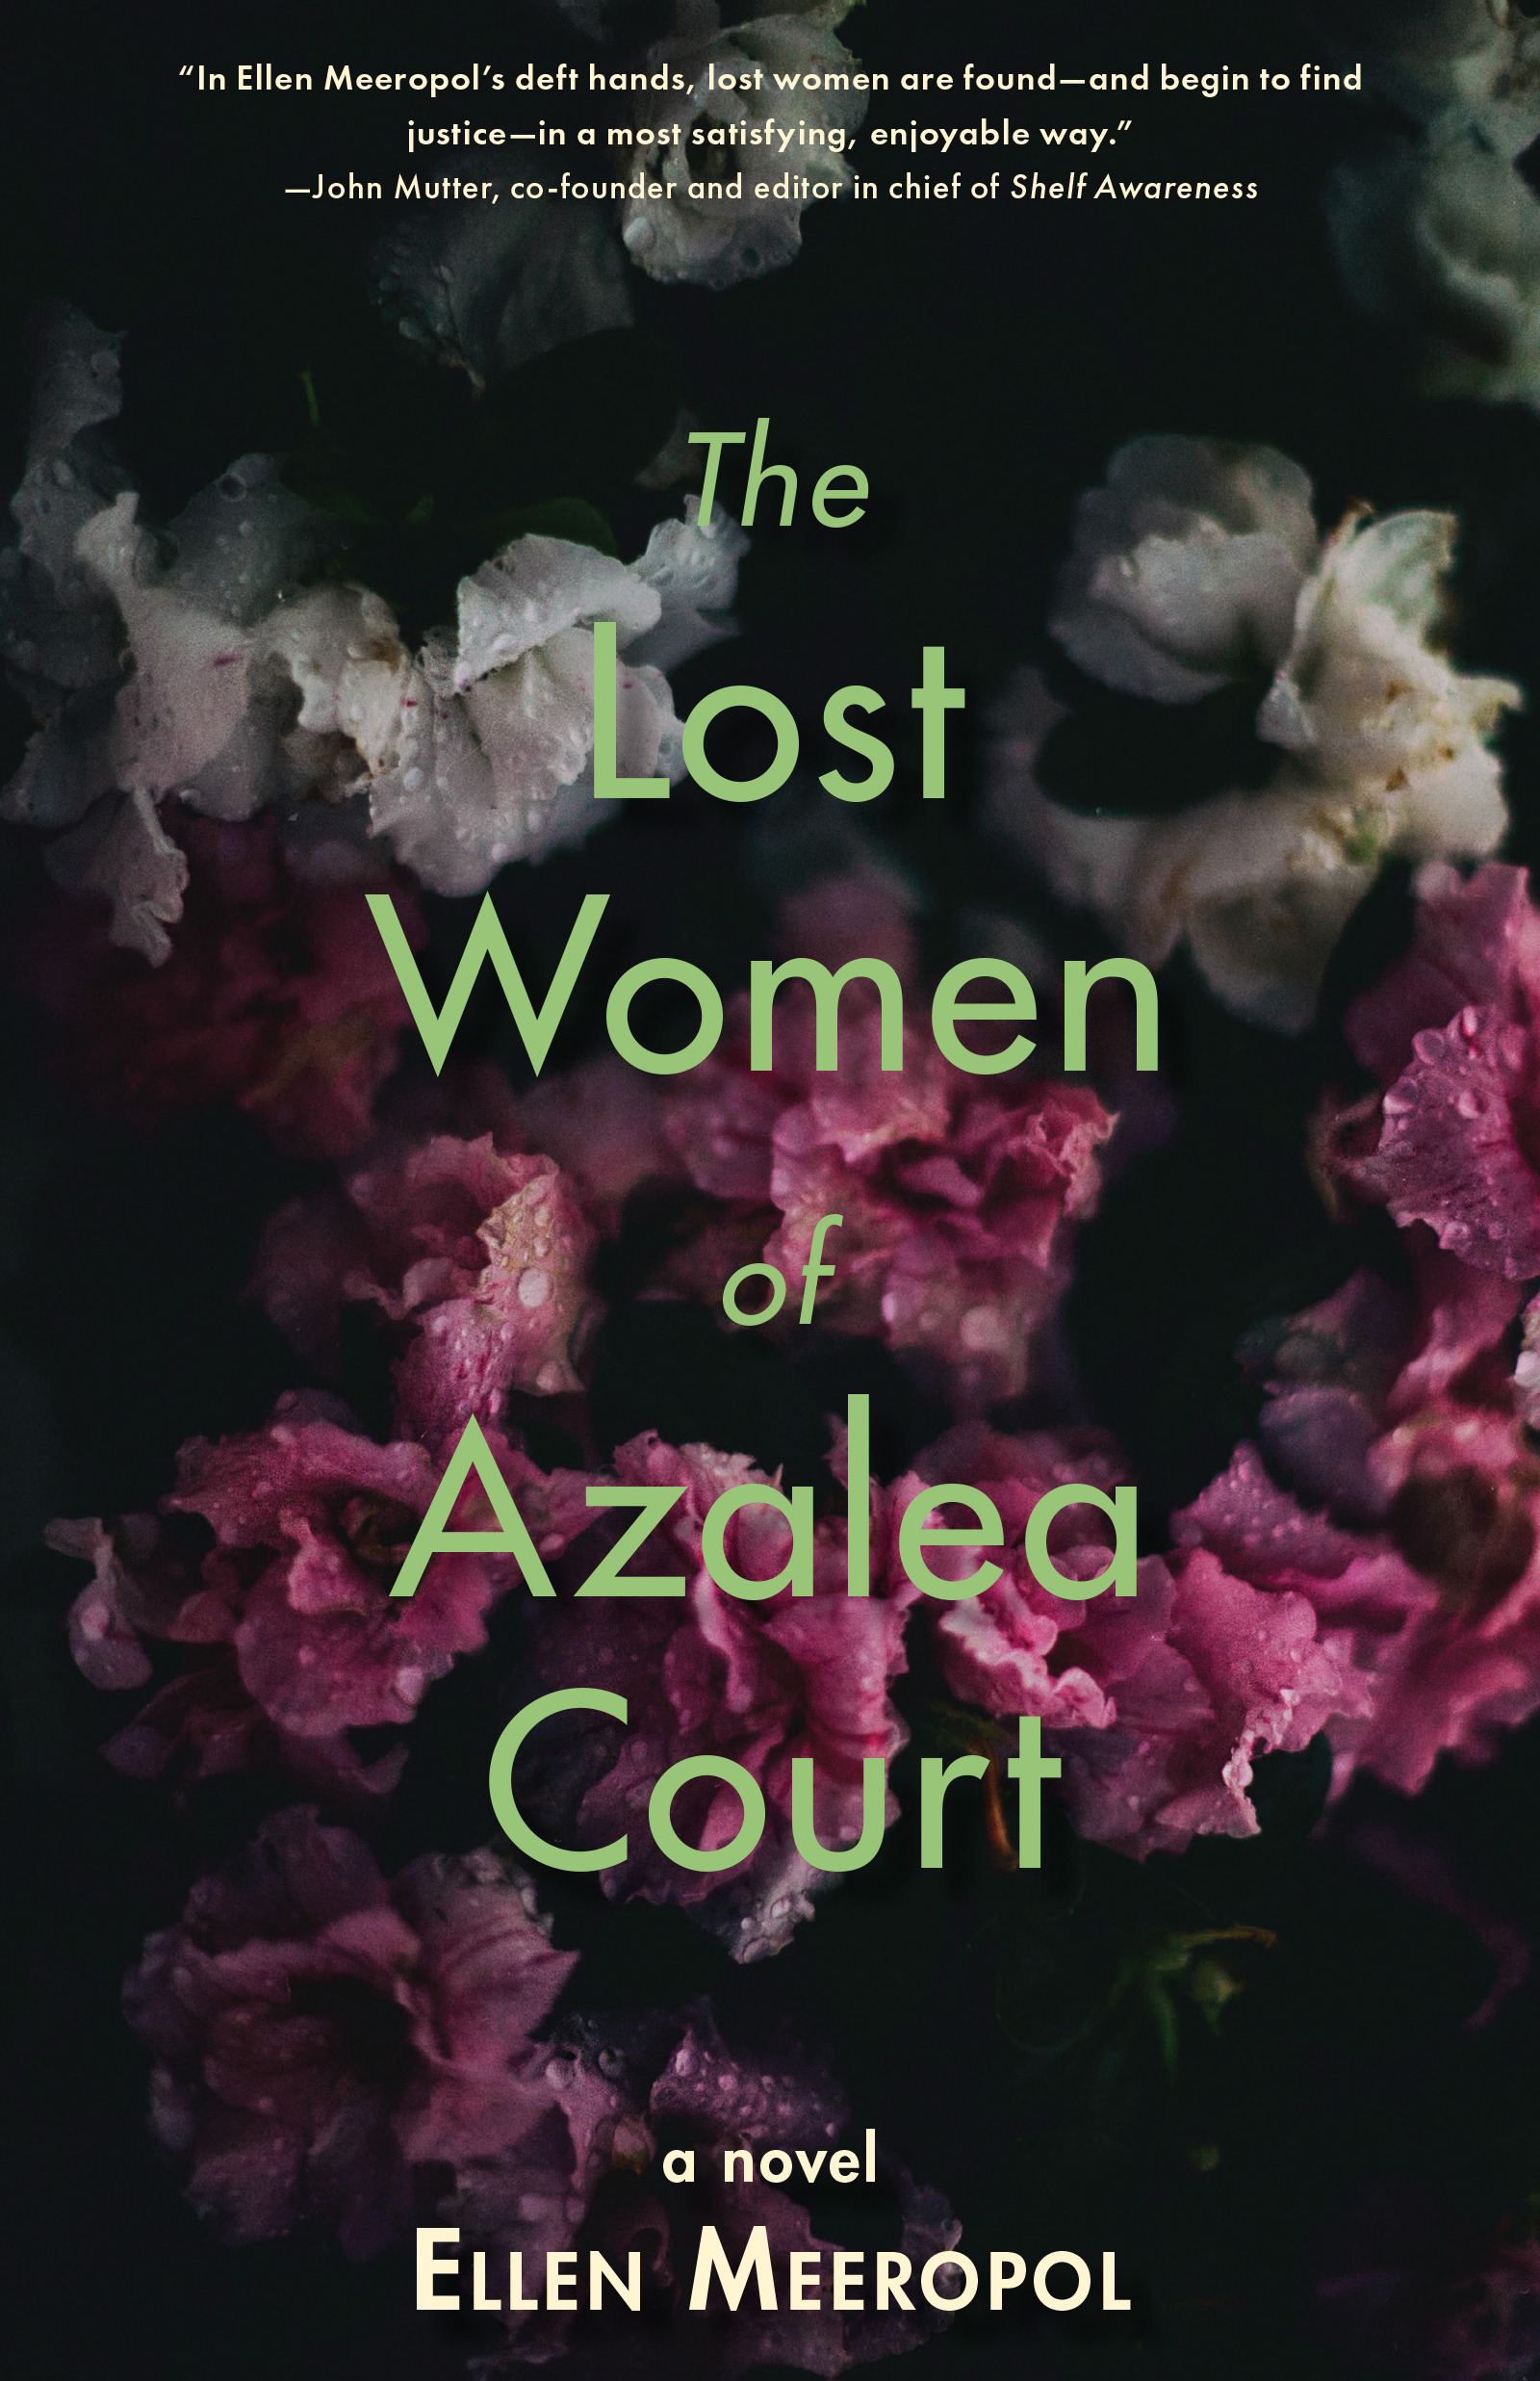 Green text stating "The Lost Women of Azalea Court" a novel by Ellen Meeropol, over a photograph of a bouquet of white and purple flowers